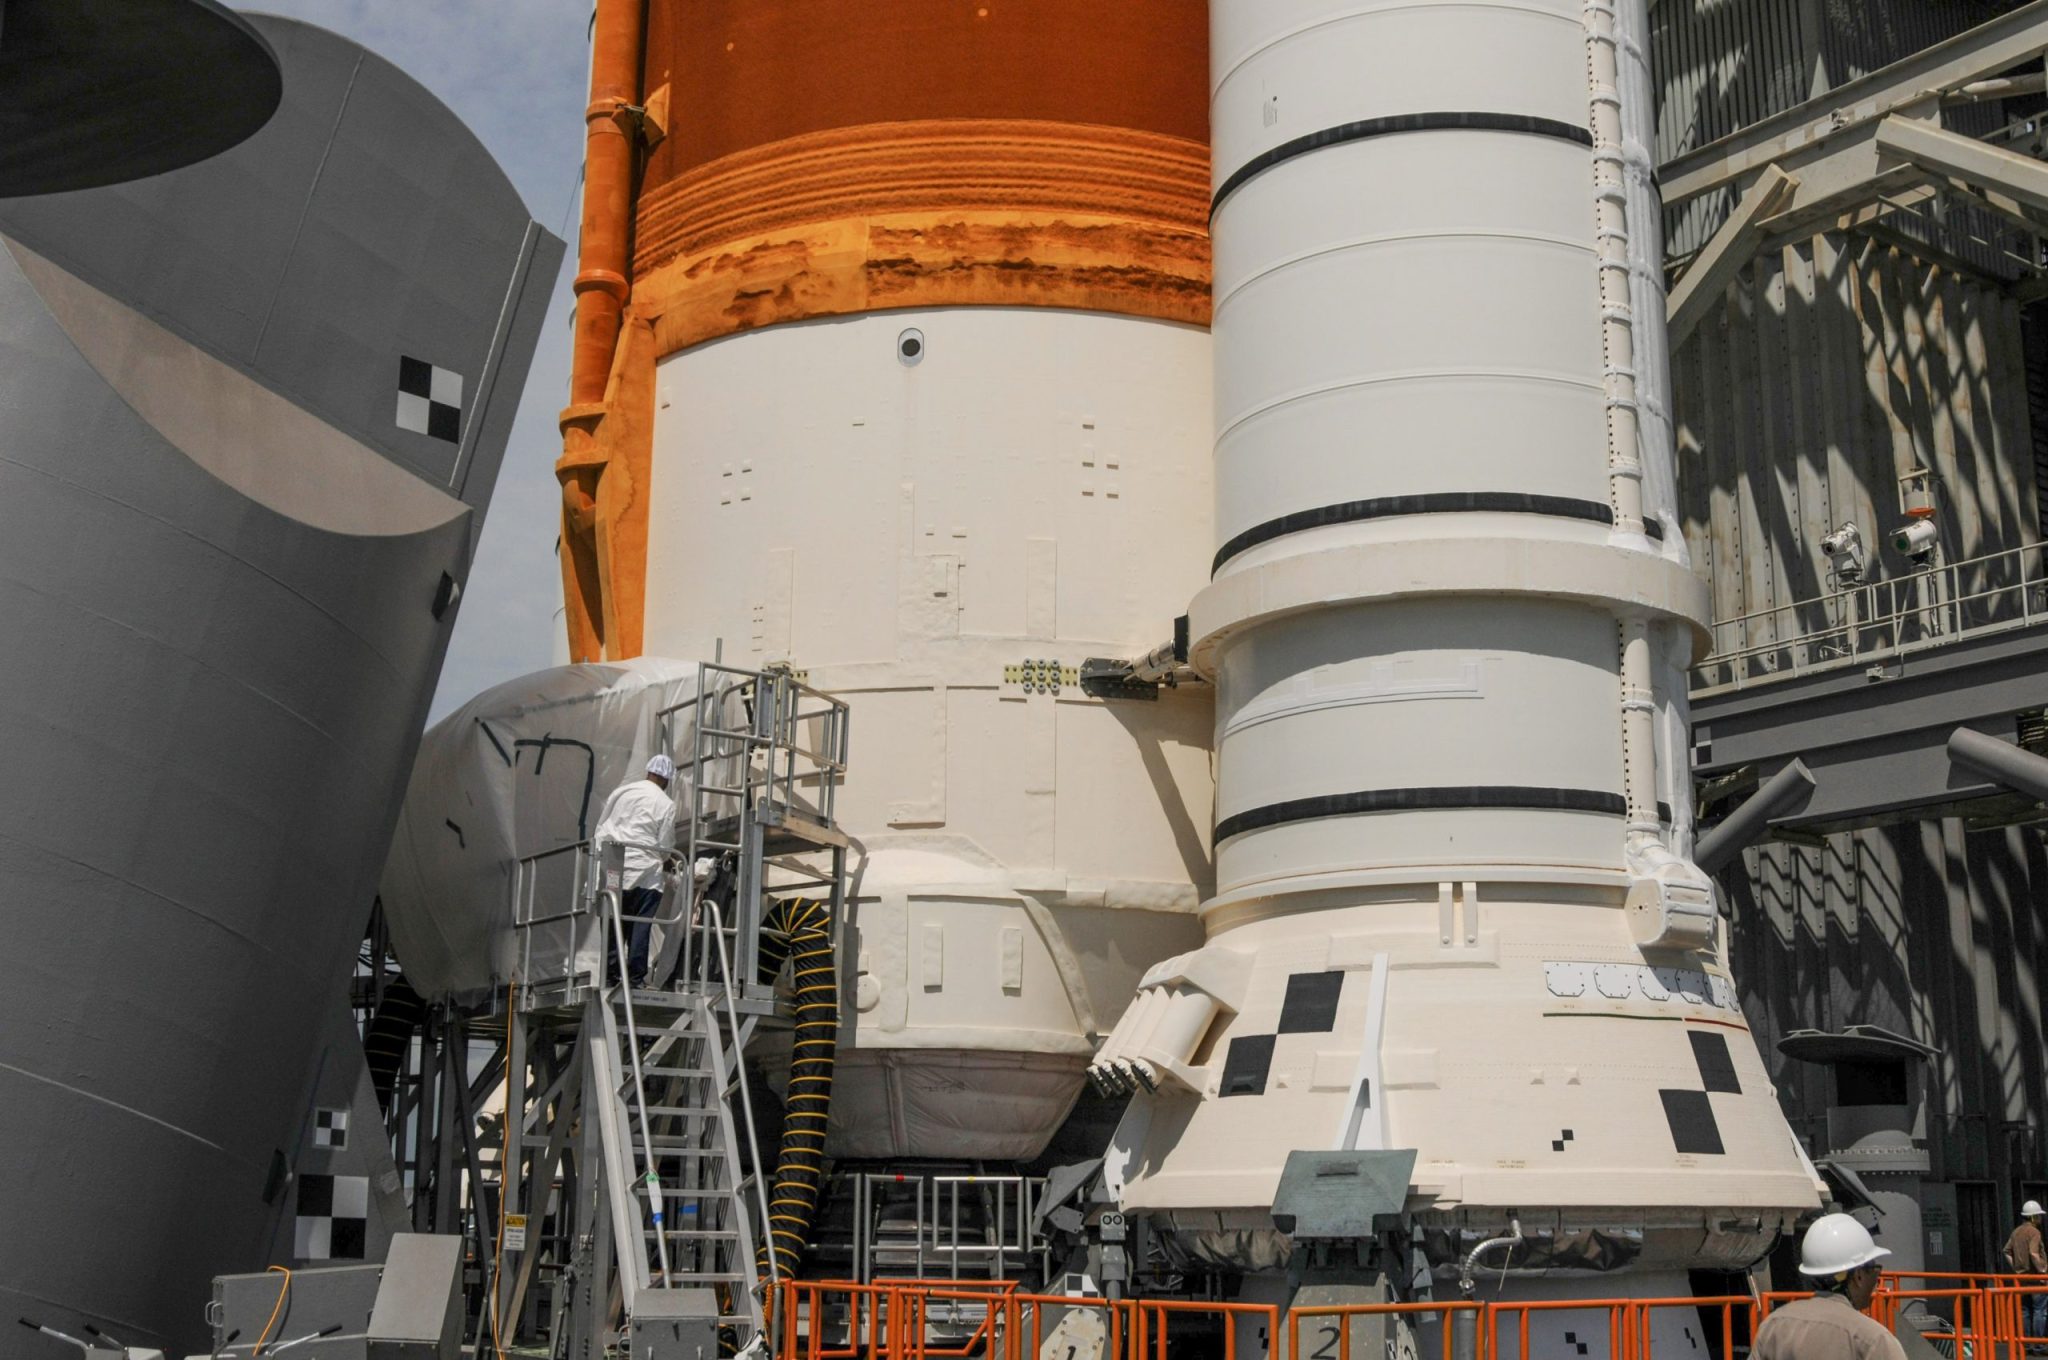 NASA’s Space Launch System (SLS) rocket is seen at Launch Pad 39B Sept. 8 at Kennedy Space Center as teams work to replace the seal on an interface.